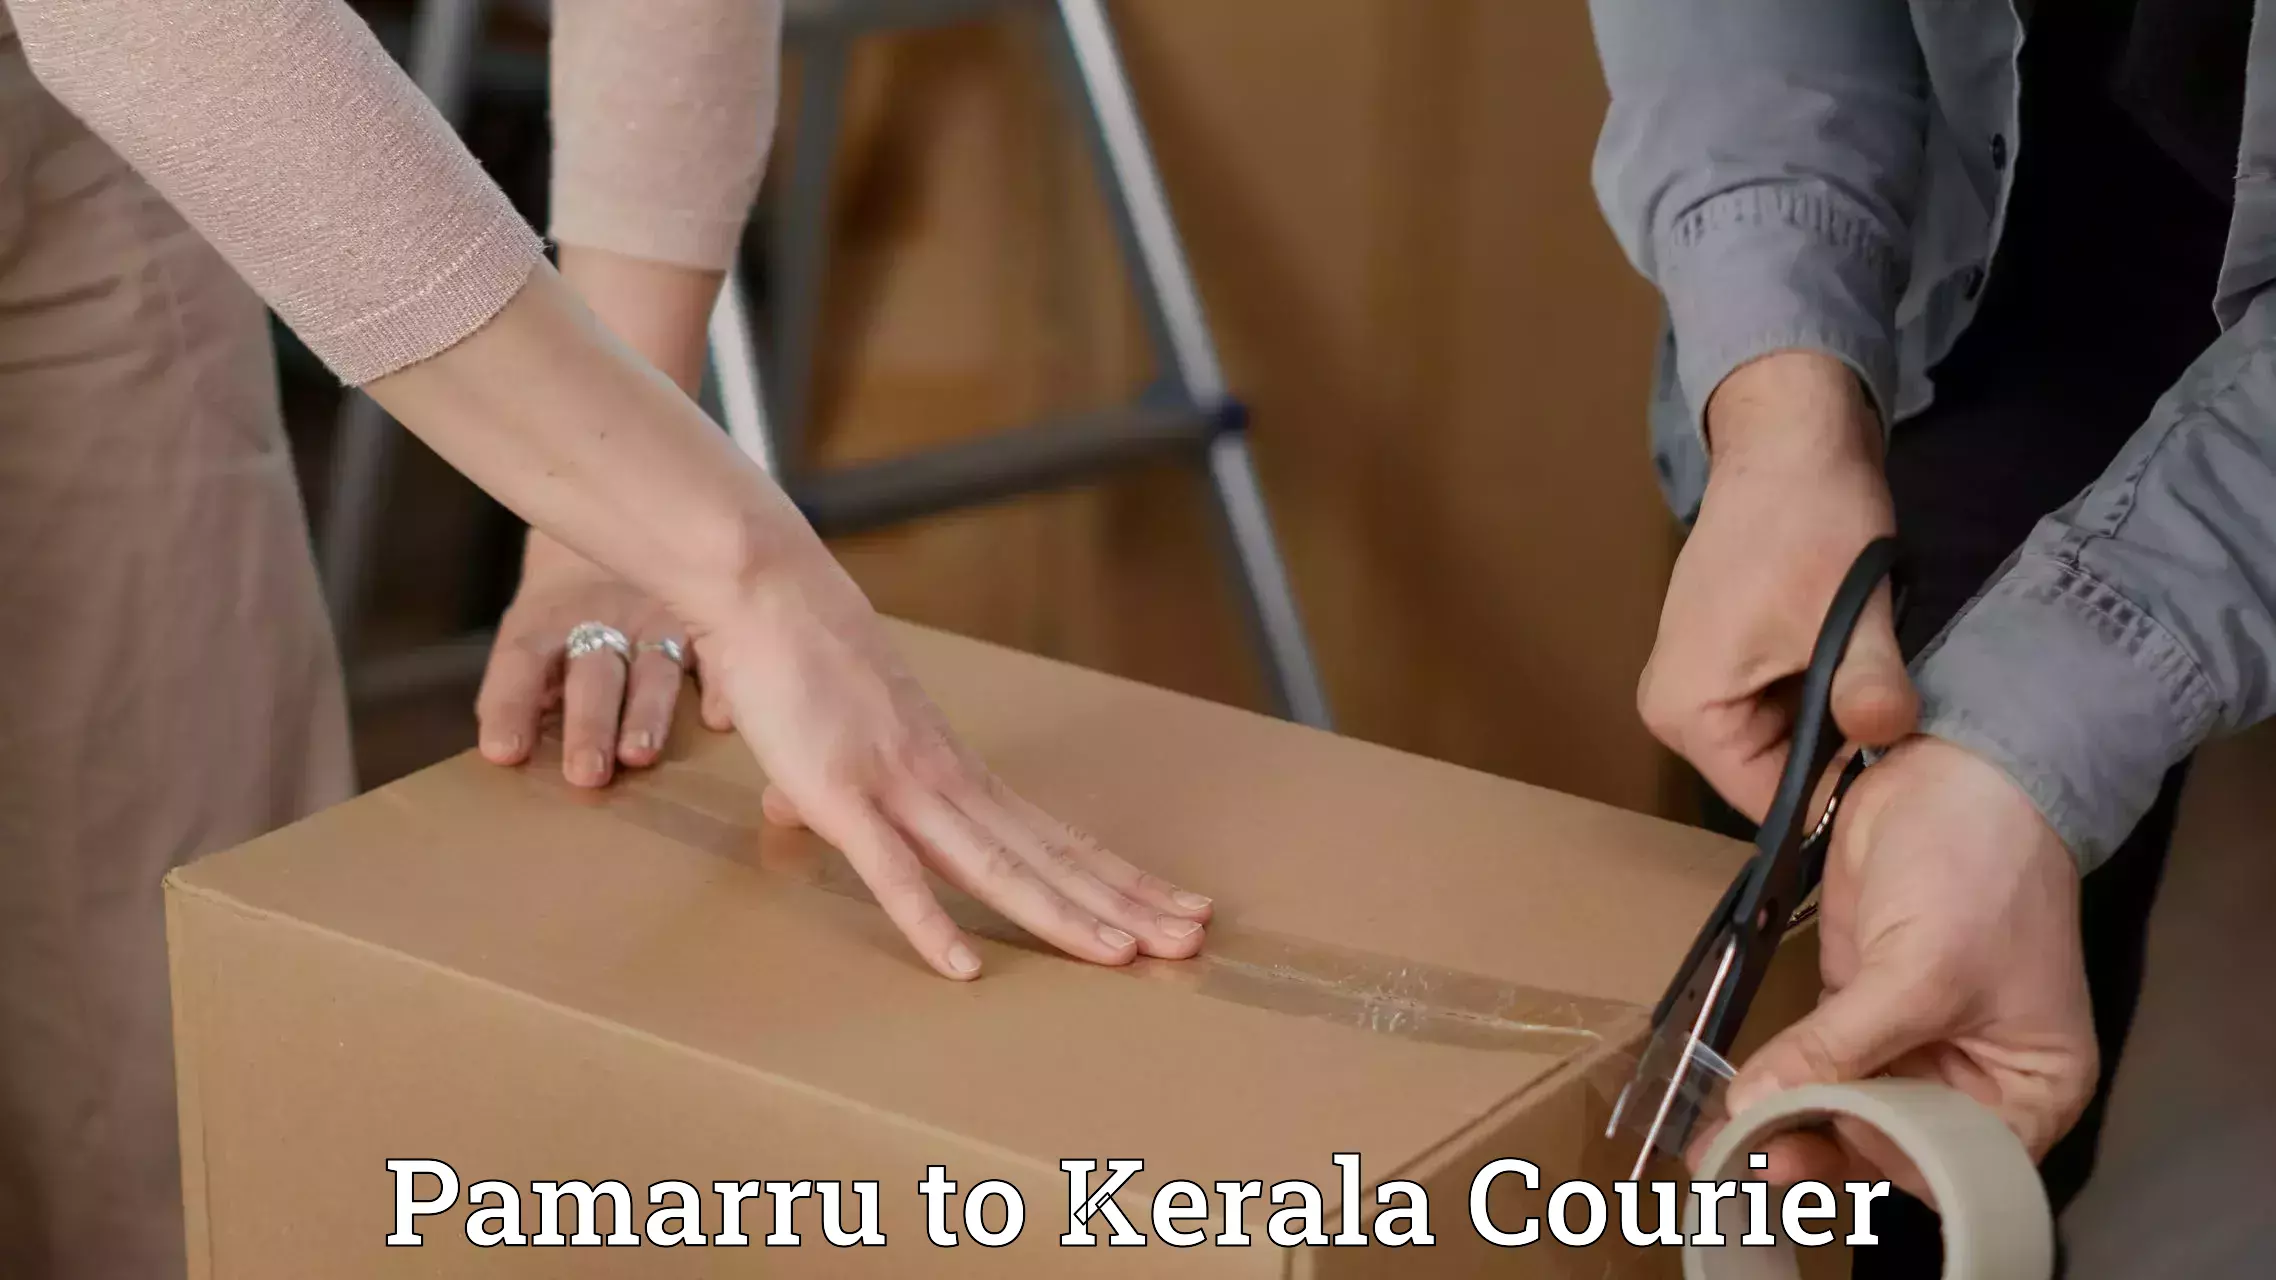 User-friendly delivery service Pamarru to Kerala